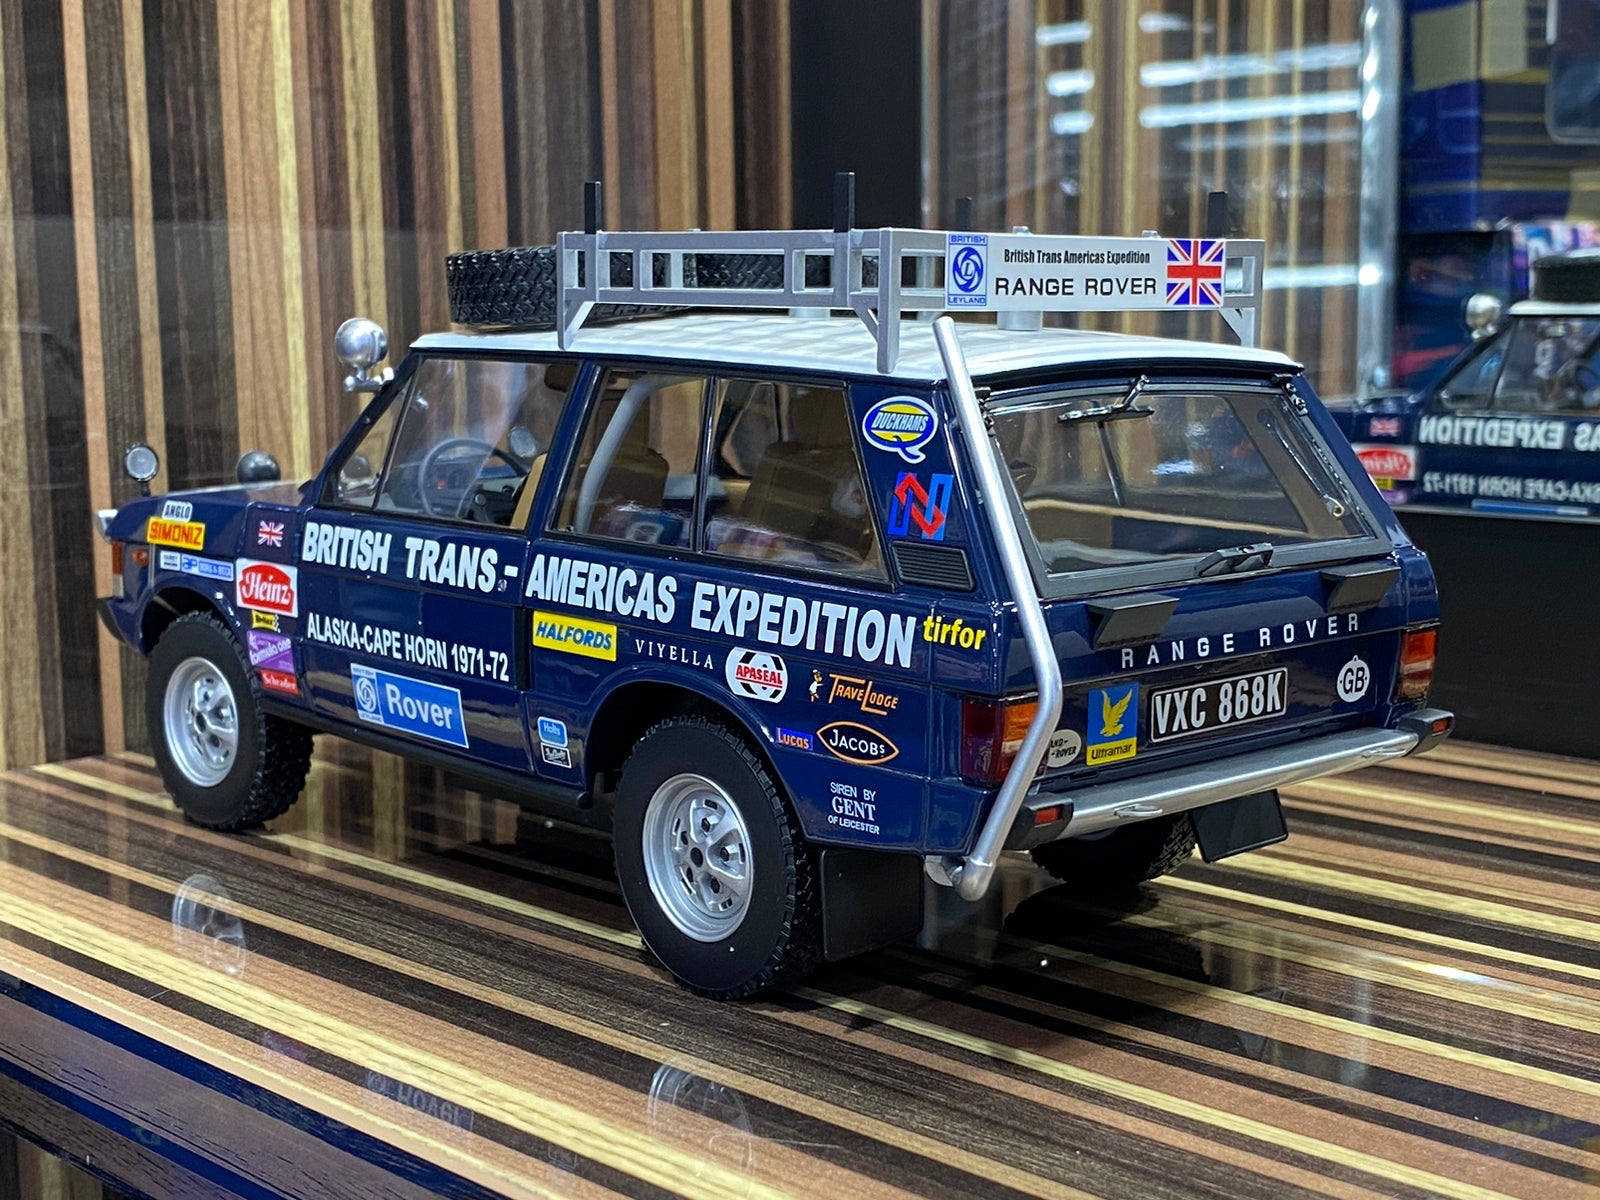 1/18 Diecast Land Rover Range Rover "The British Trans-Americas Expedition" 1971-1972 Blue Almost Real Model Car